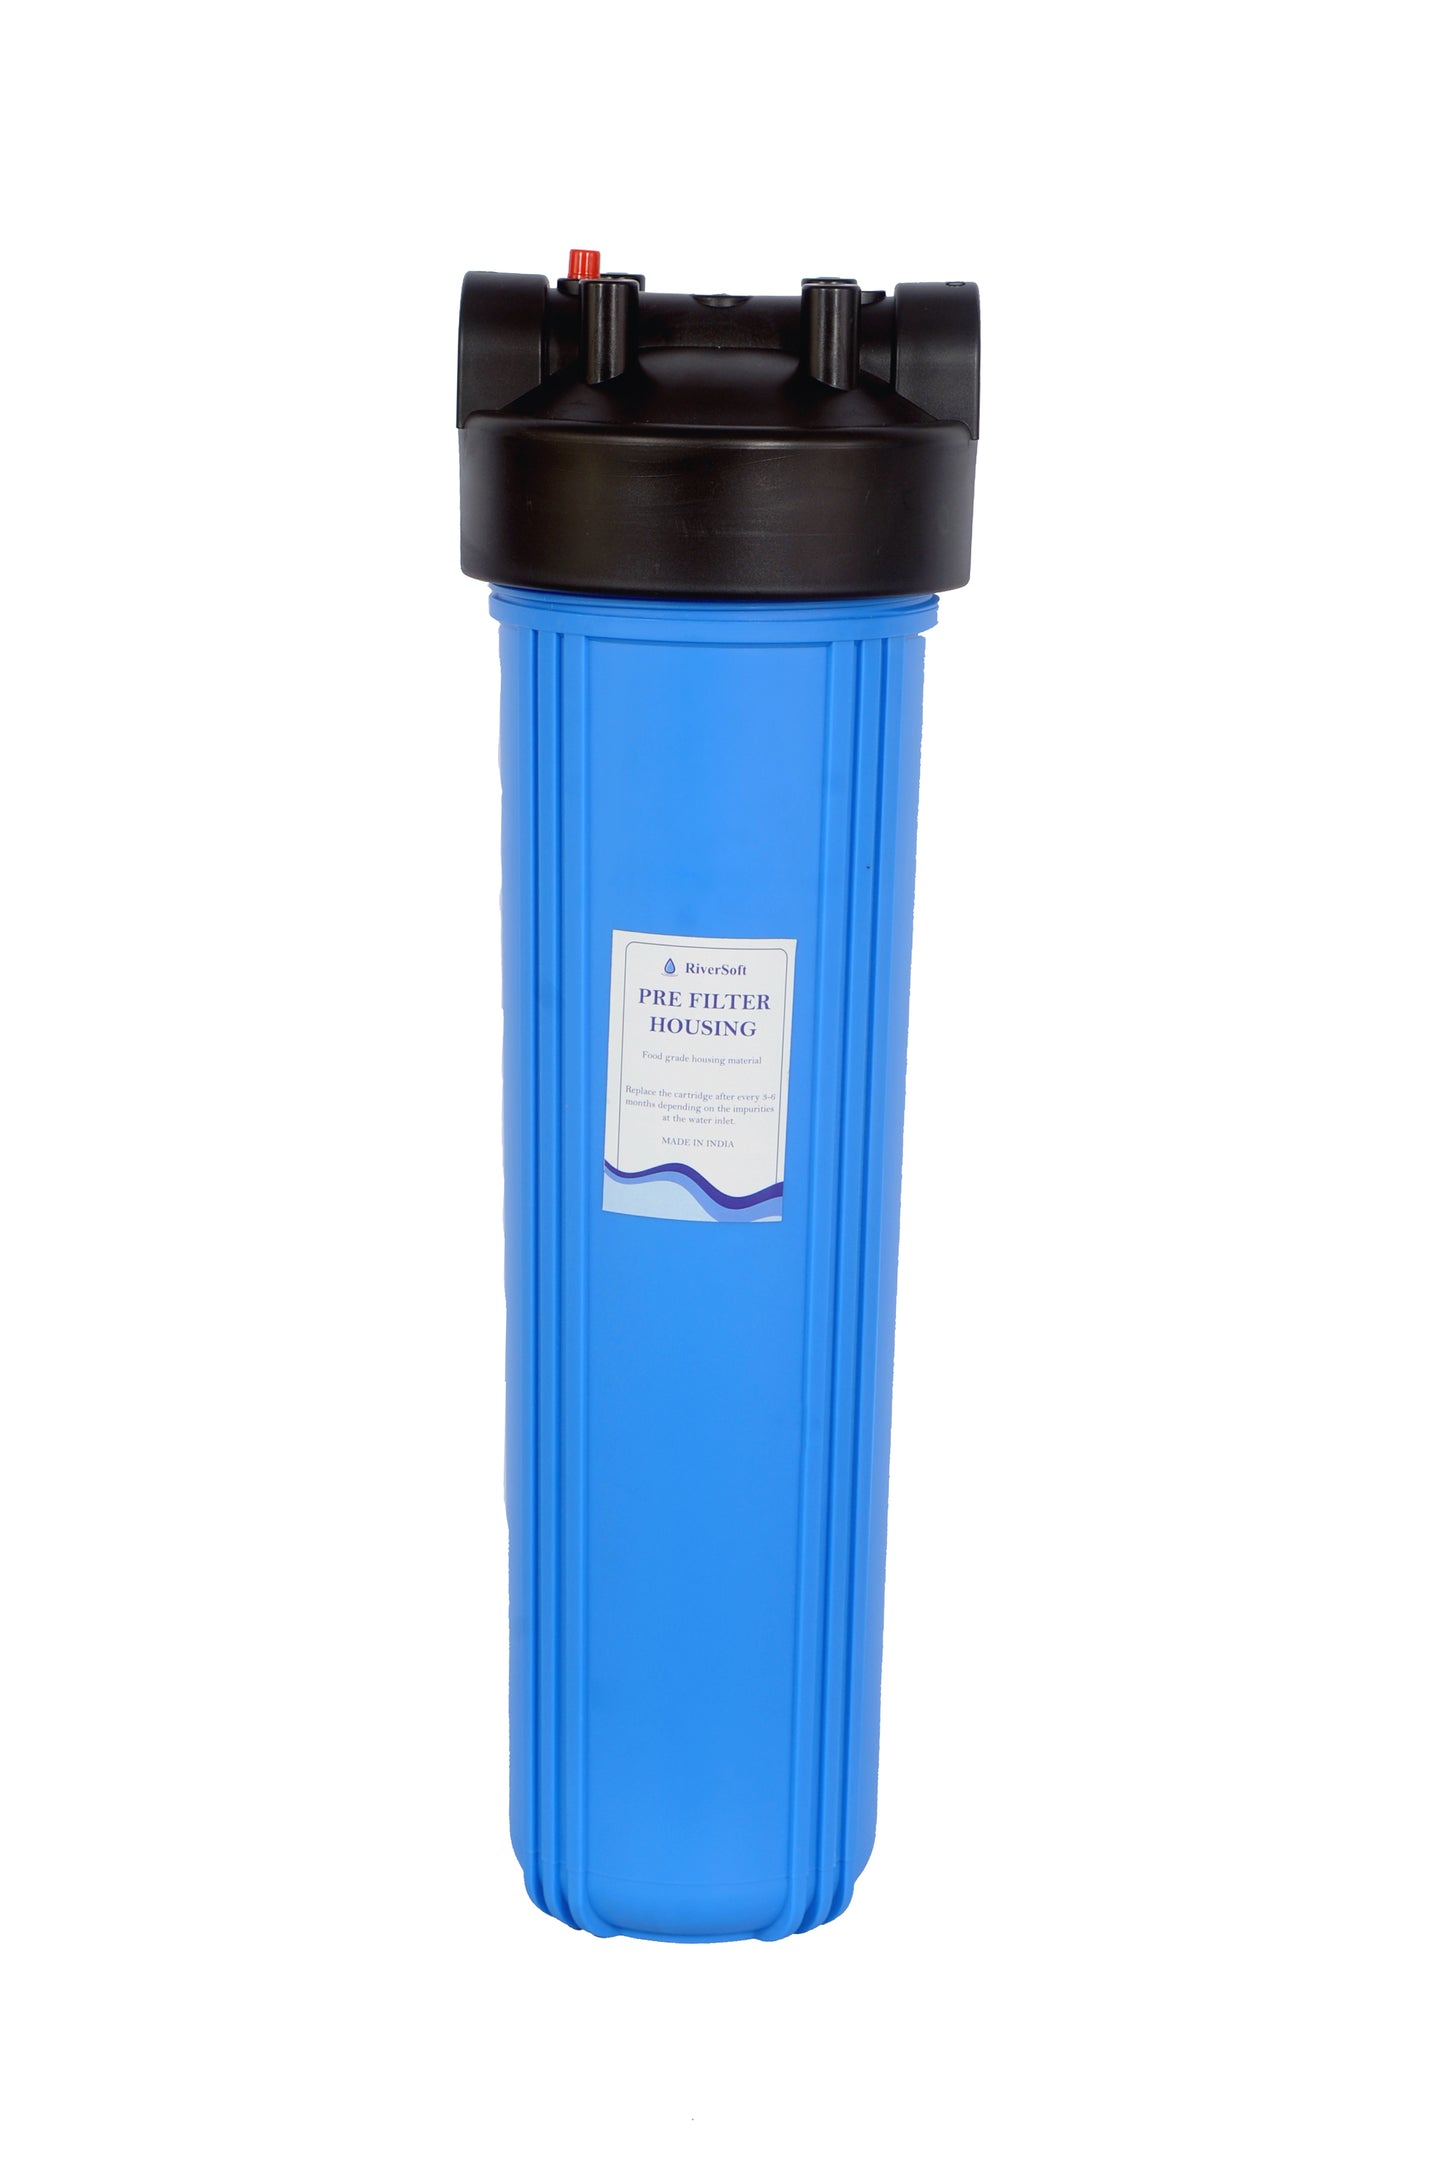 RiverSoft Sediment Filter Assembly ASP-20-HV5, Spun Cartridge 5 Micron For Filtering Sediments, Install In Mainline for 1 HP/2 HP motor (20 inch, 5 Micron, 1 inch inlet/outlet, Blue, PP)